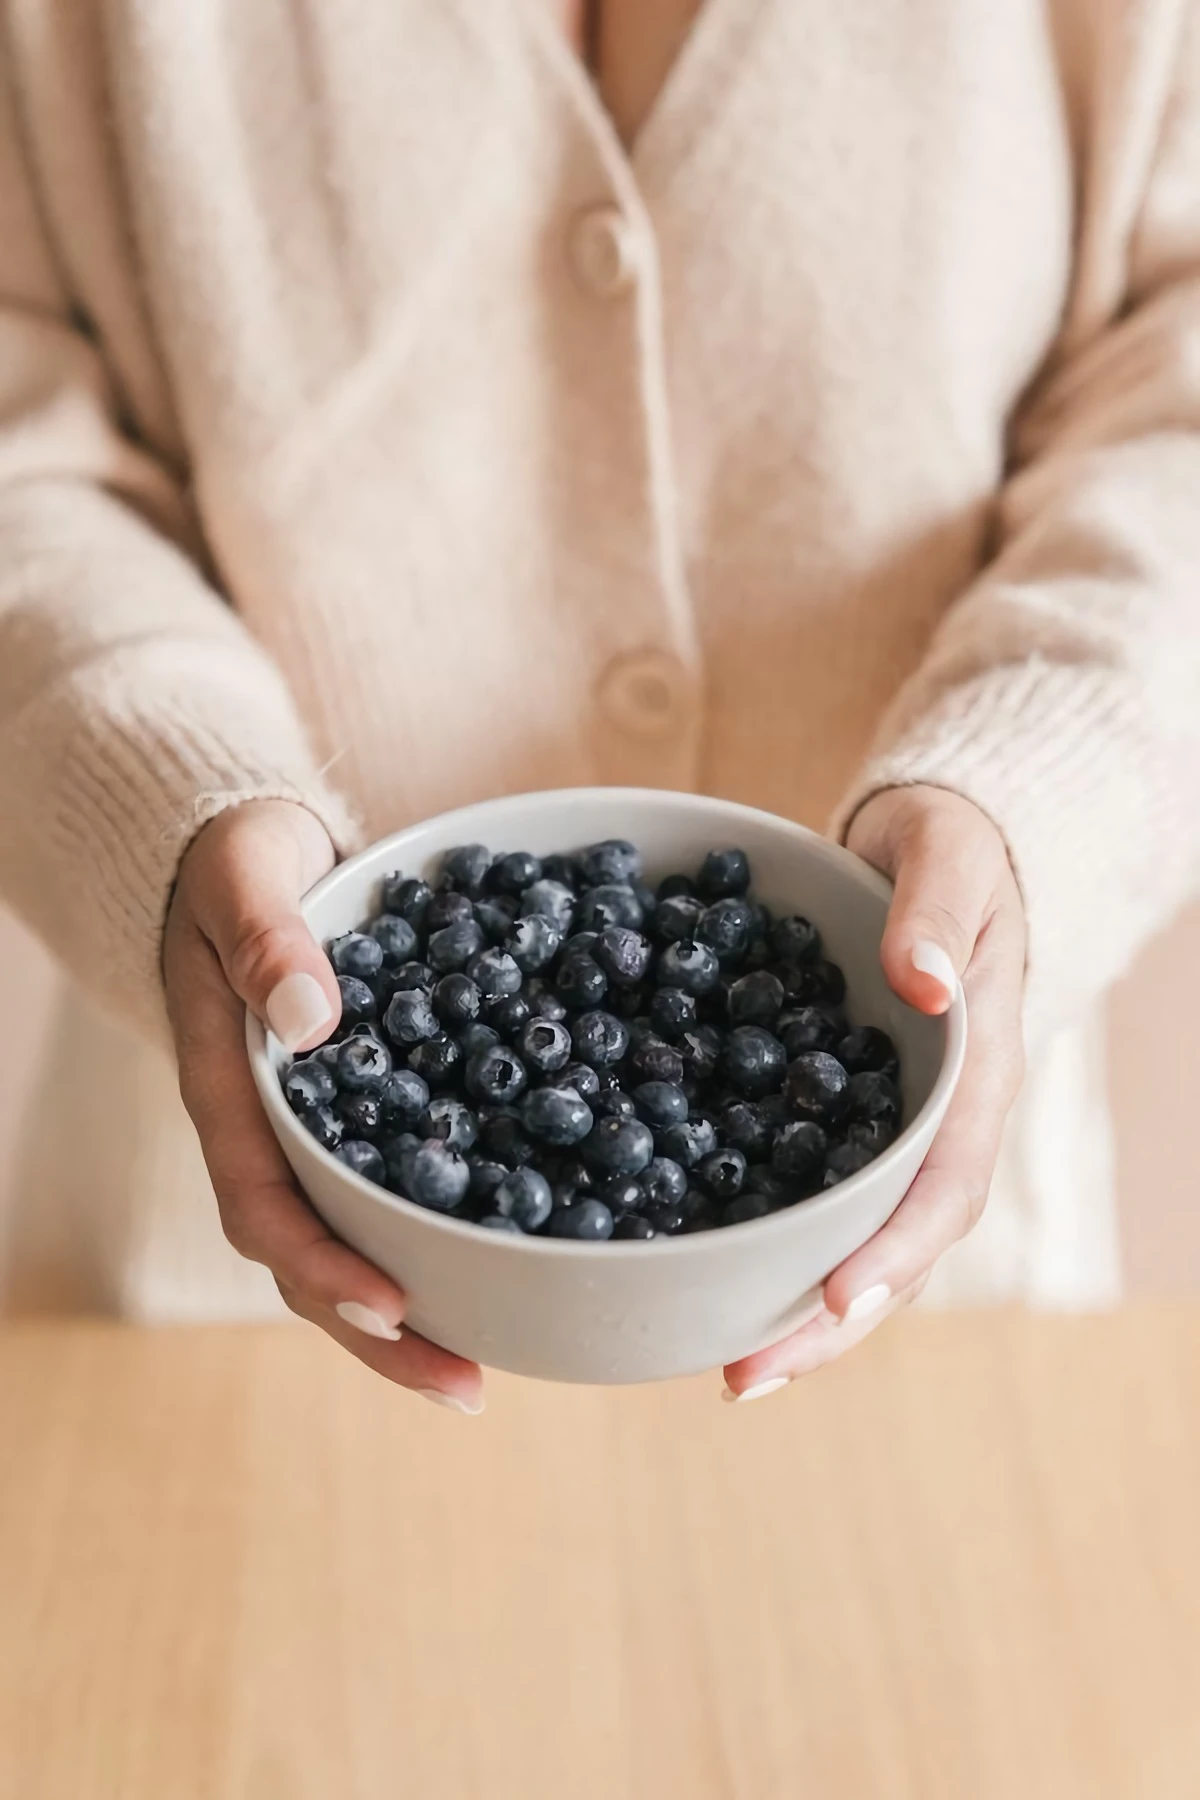 hands holding a bowl of berries